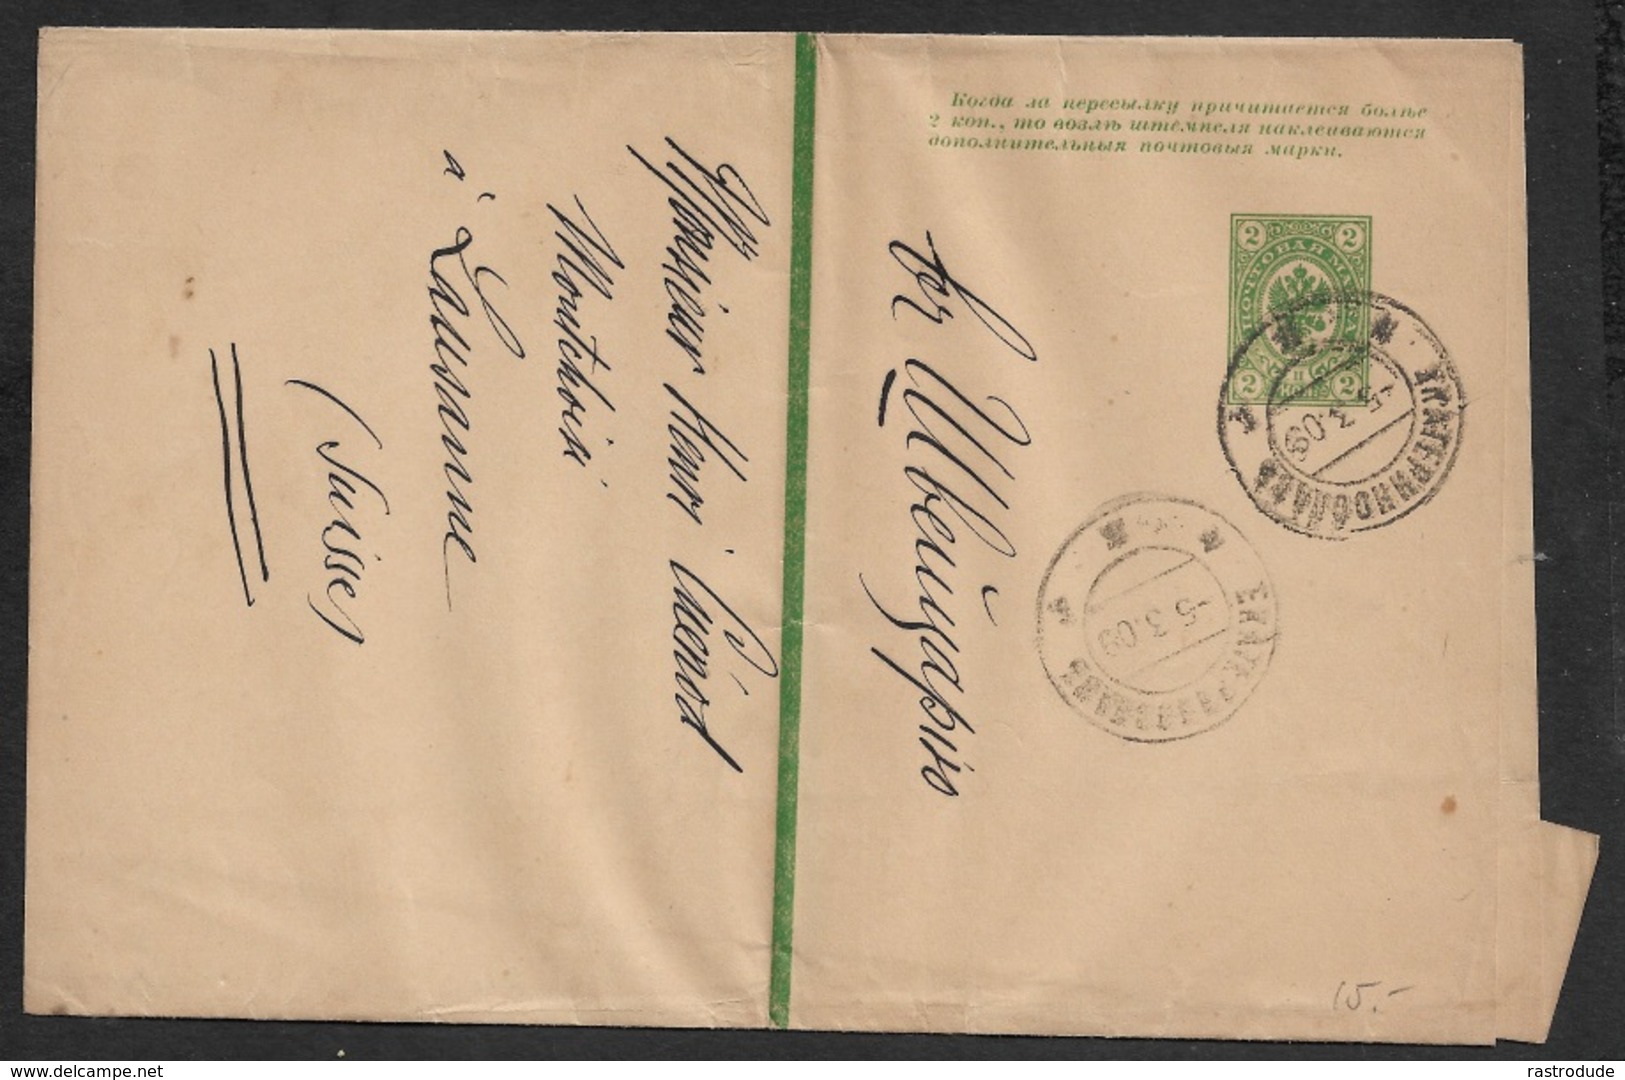 RUSSIA 1909 - 2 KOP NEWSPAPER WRAPPER Sent To SWITZERLAND - Covers & Documents